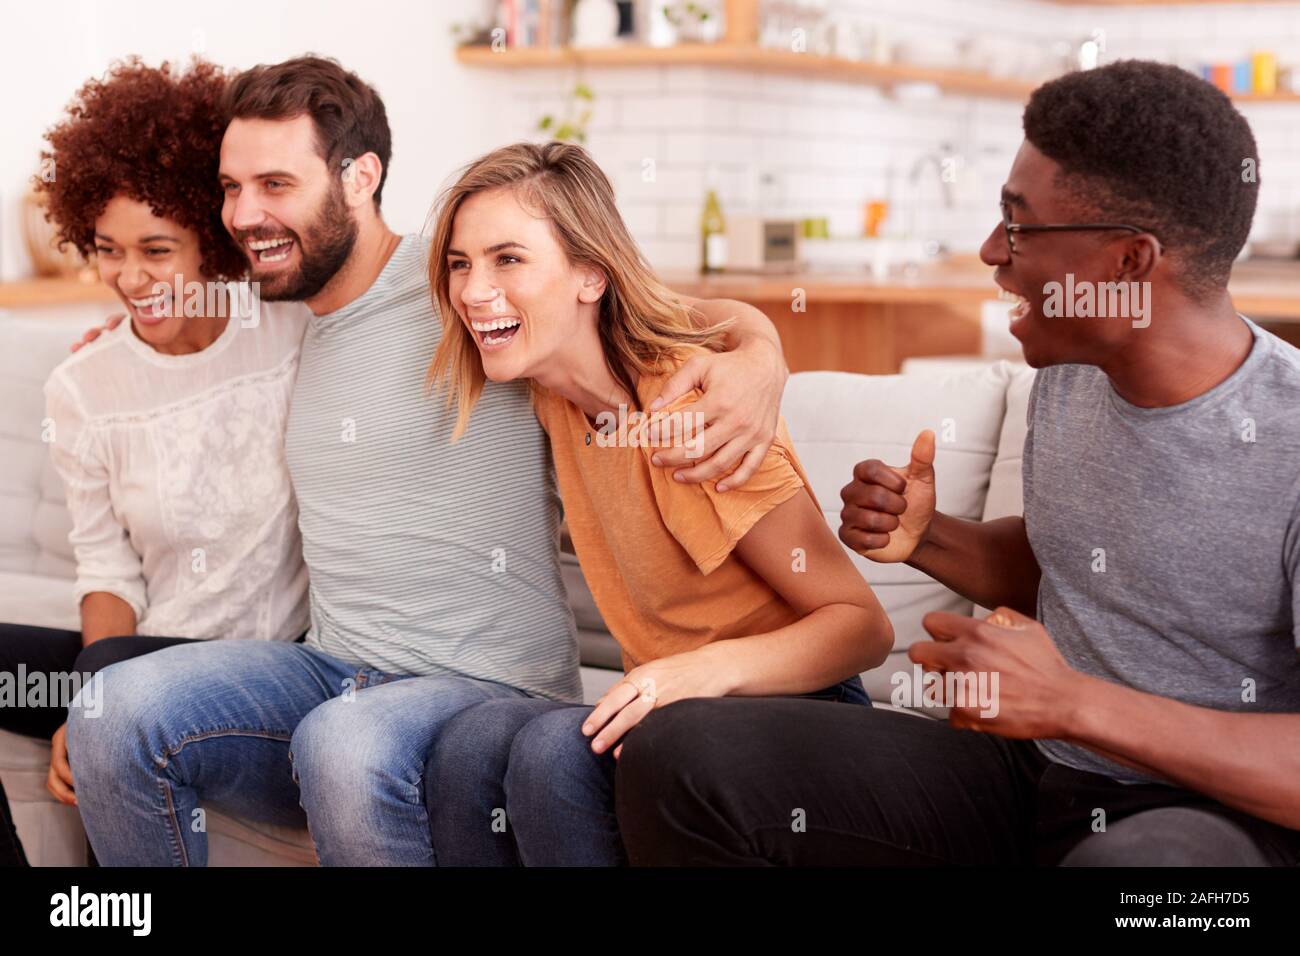 Excited Group Of Friends Sitting On Sofa And Watching Sports On TV Stock Photo